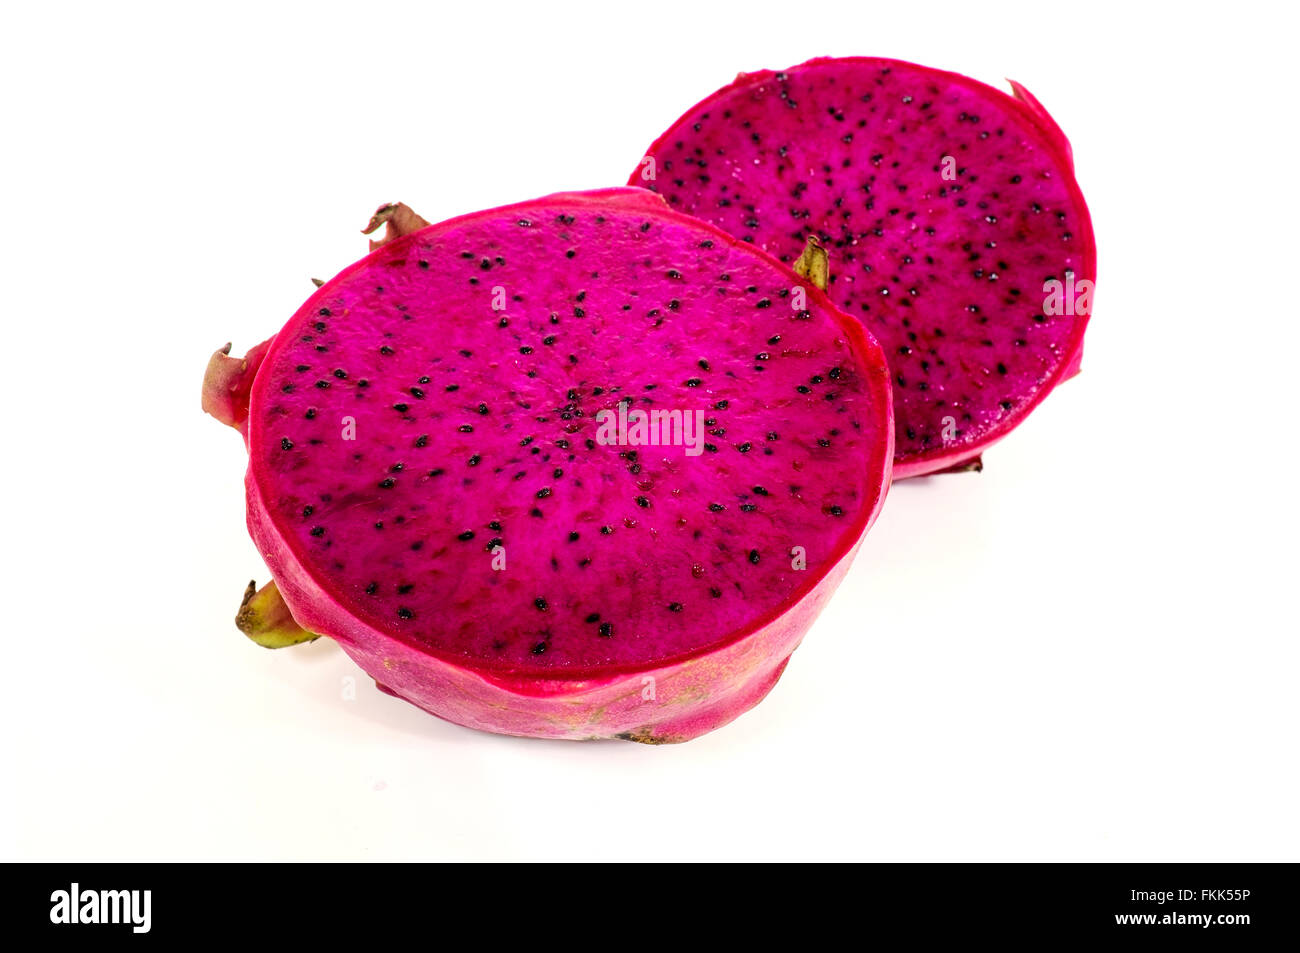 Sliced red pitahaya on a white background Stock Photo